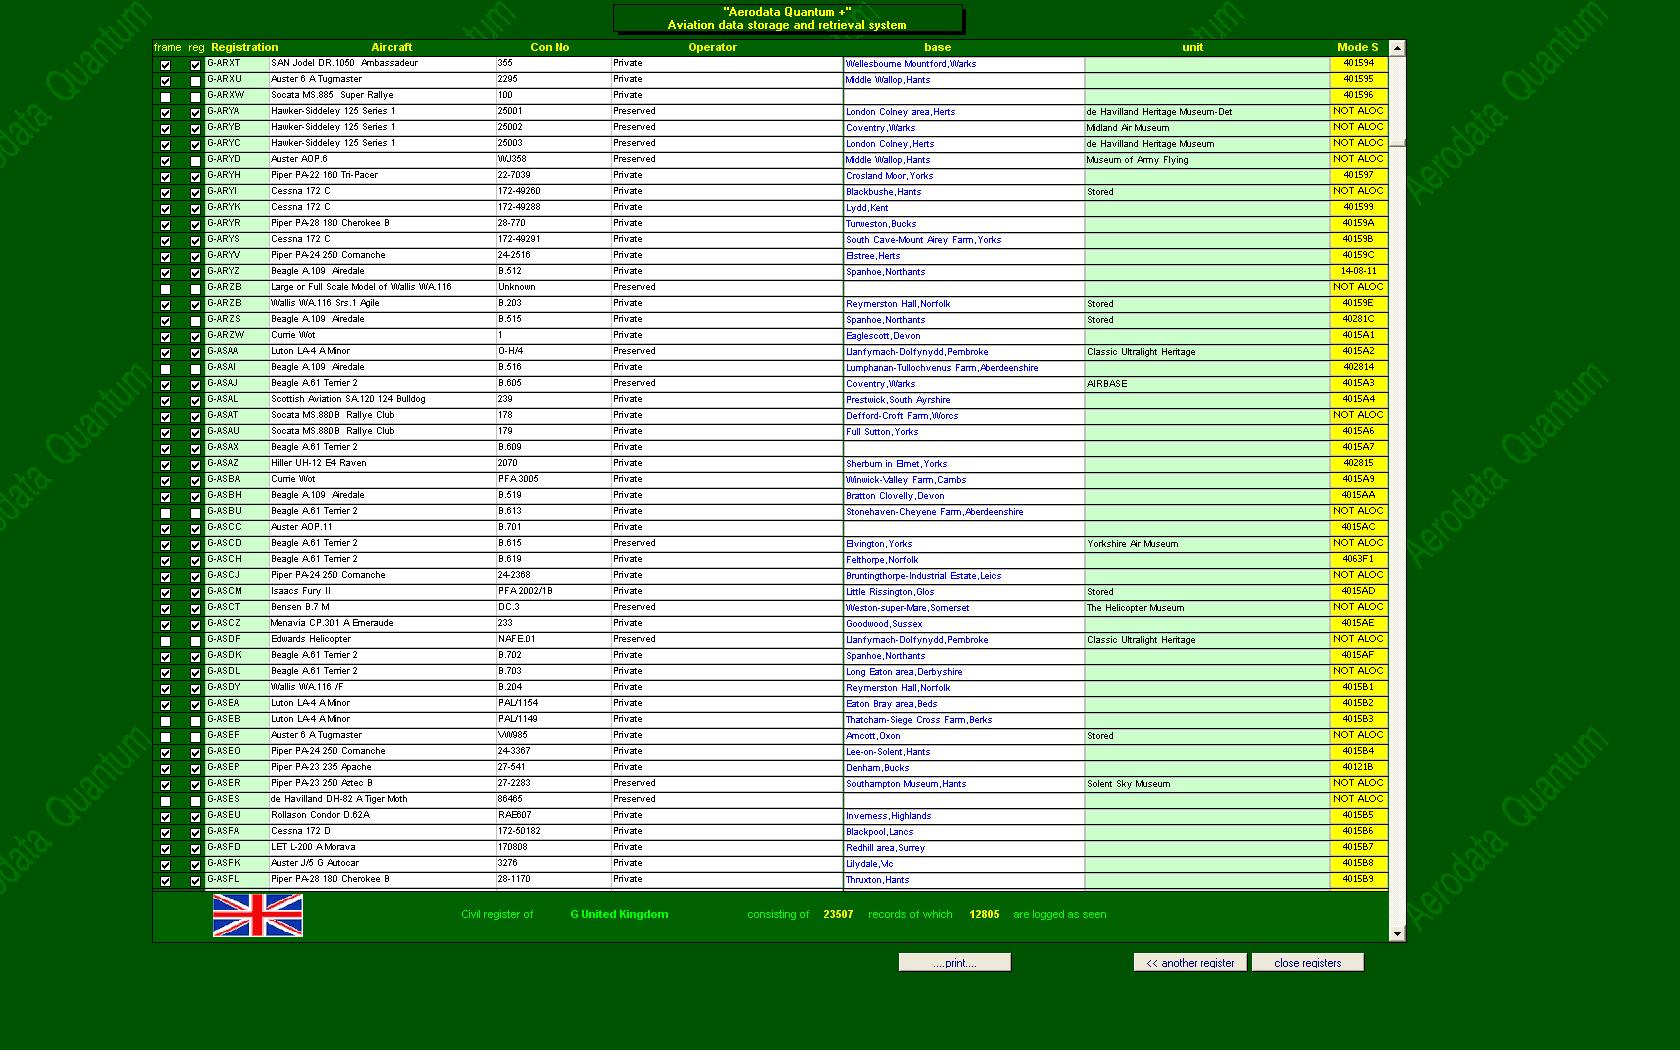 Full Country Register listing - click to enlarge